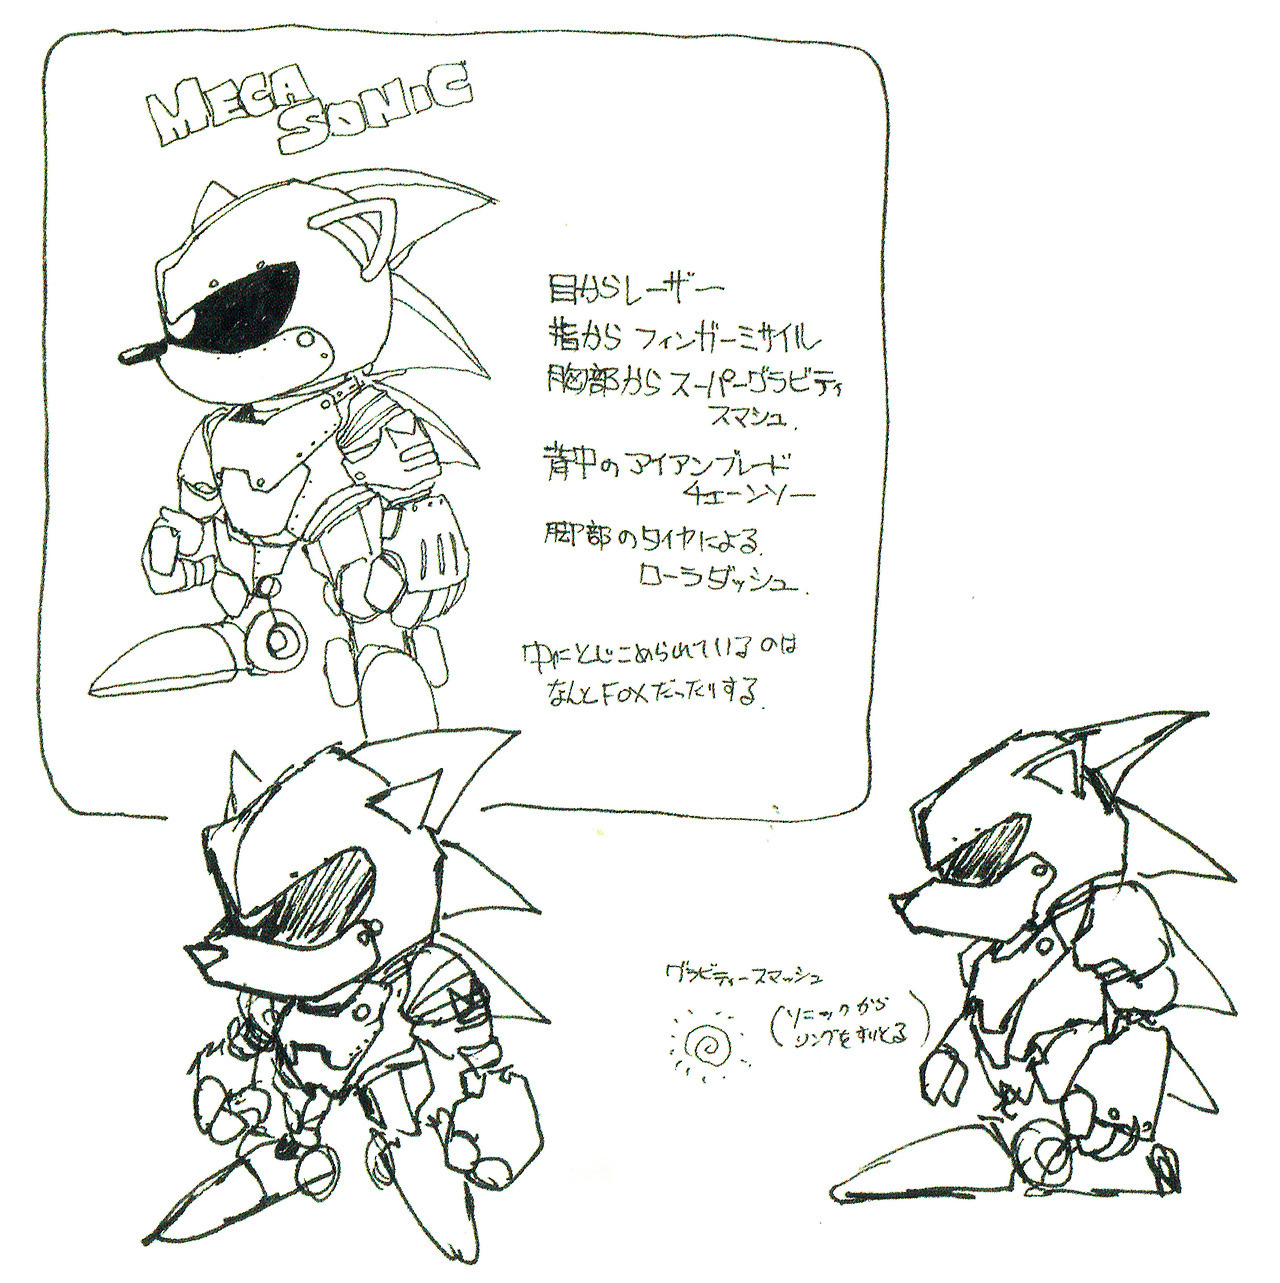 Primal Koopa Pictures on X: Scrapped Chaos Arc Season 2 Villain Mecha Sonic  + Reason: Mainly just a Mecha Sonic reskin, nothing more to say there.  Concept: A prototype of Mecha Sonic